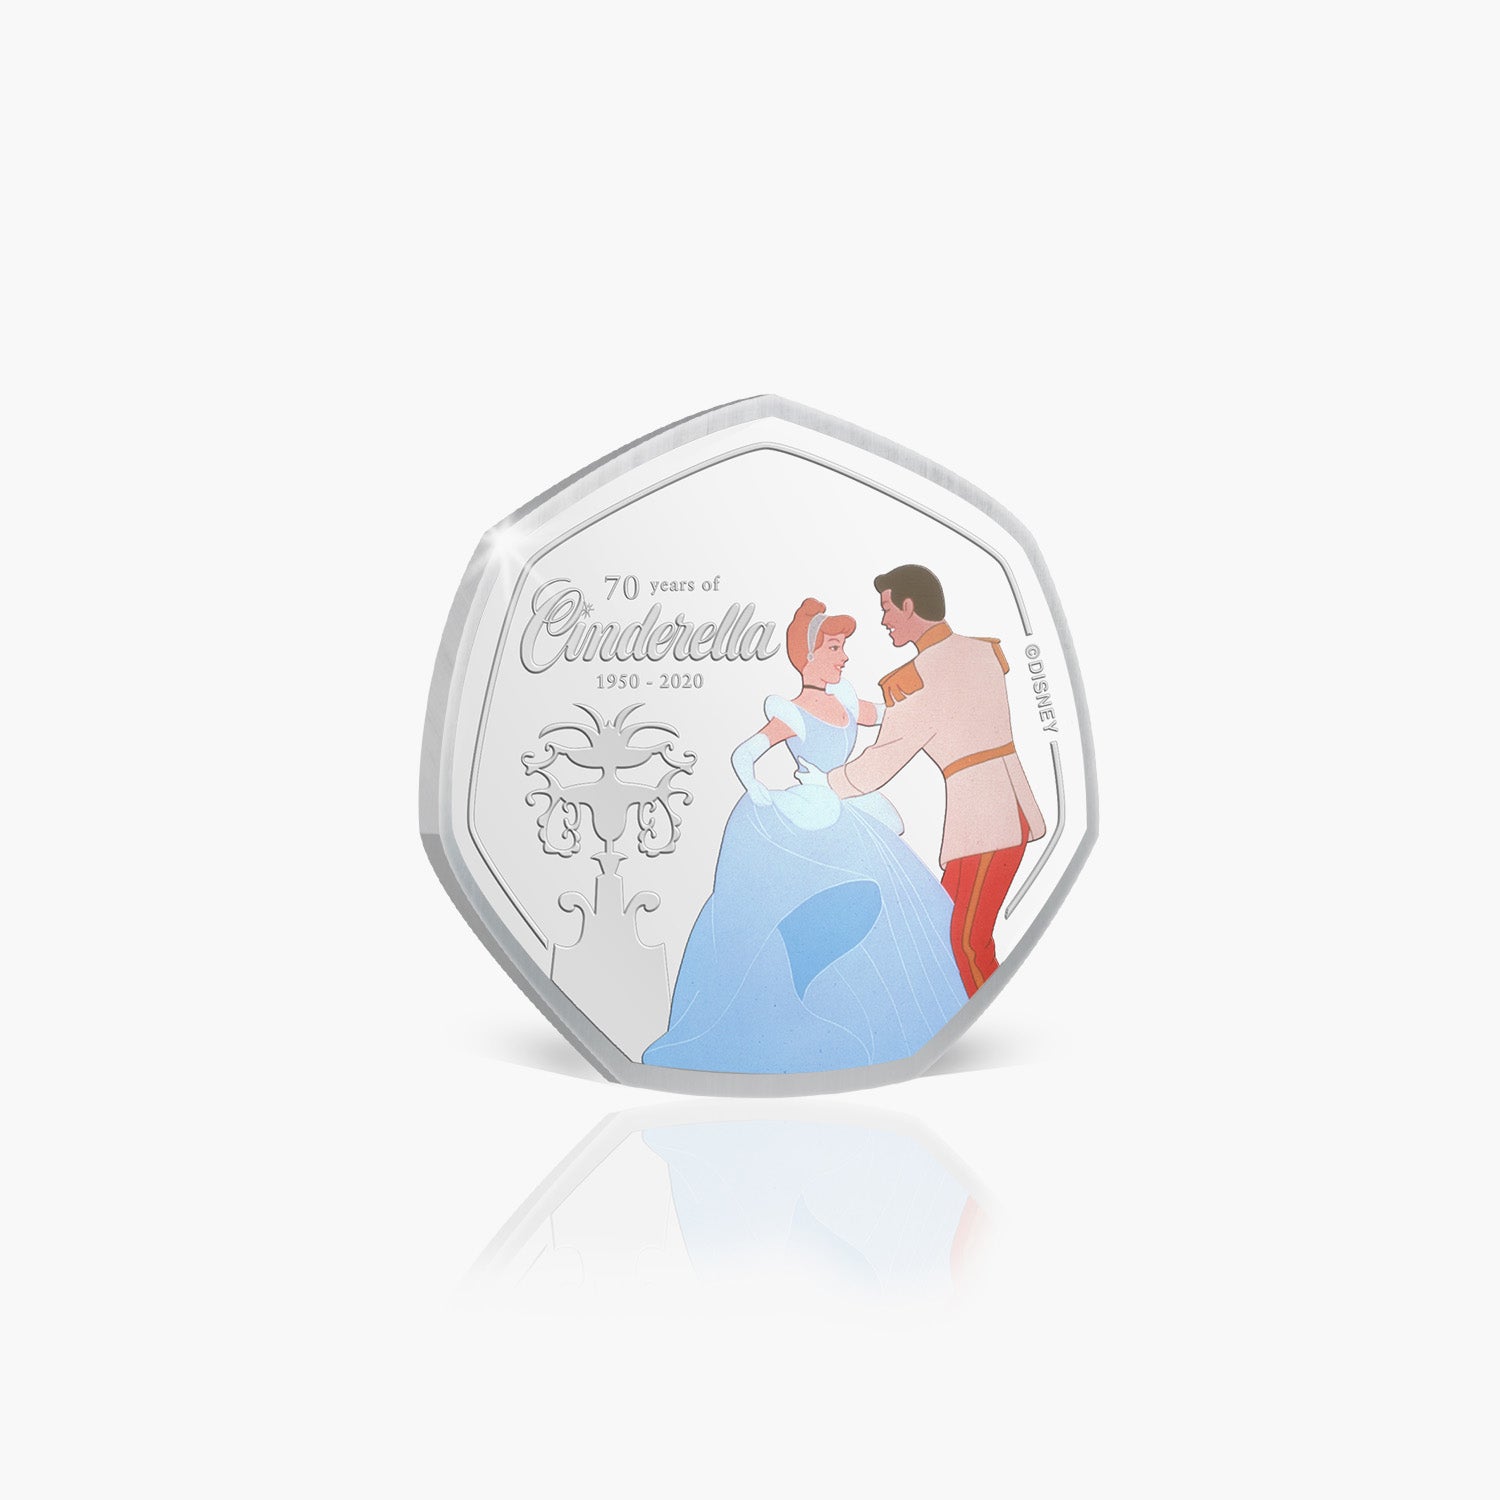 Fairy Tale Moment Silver Plated Coin